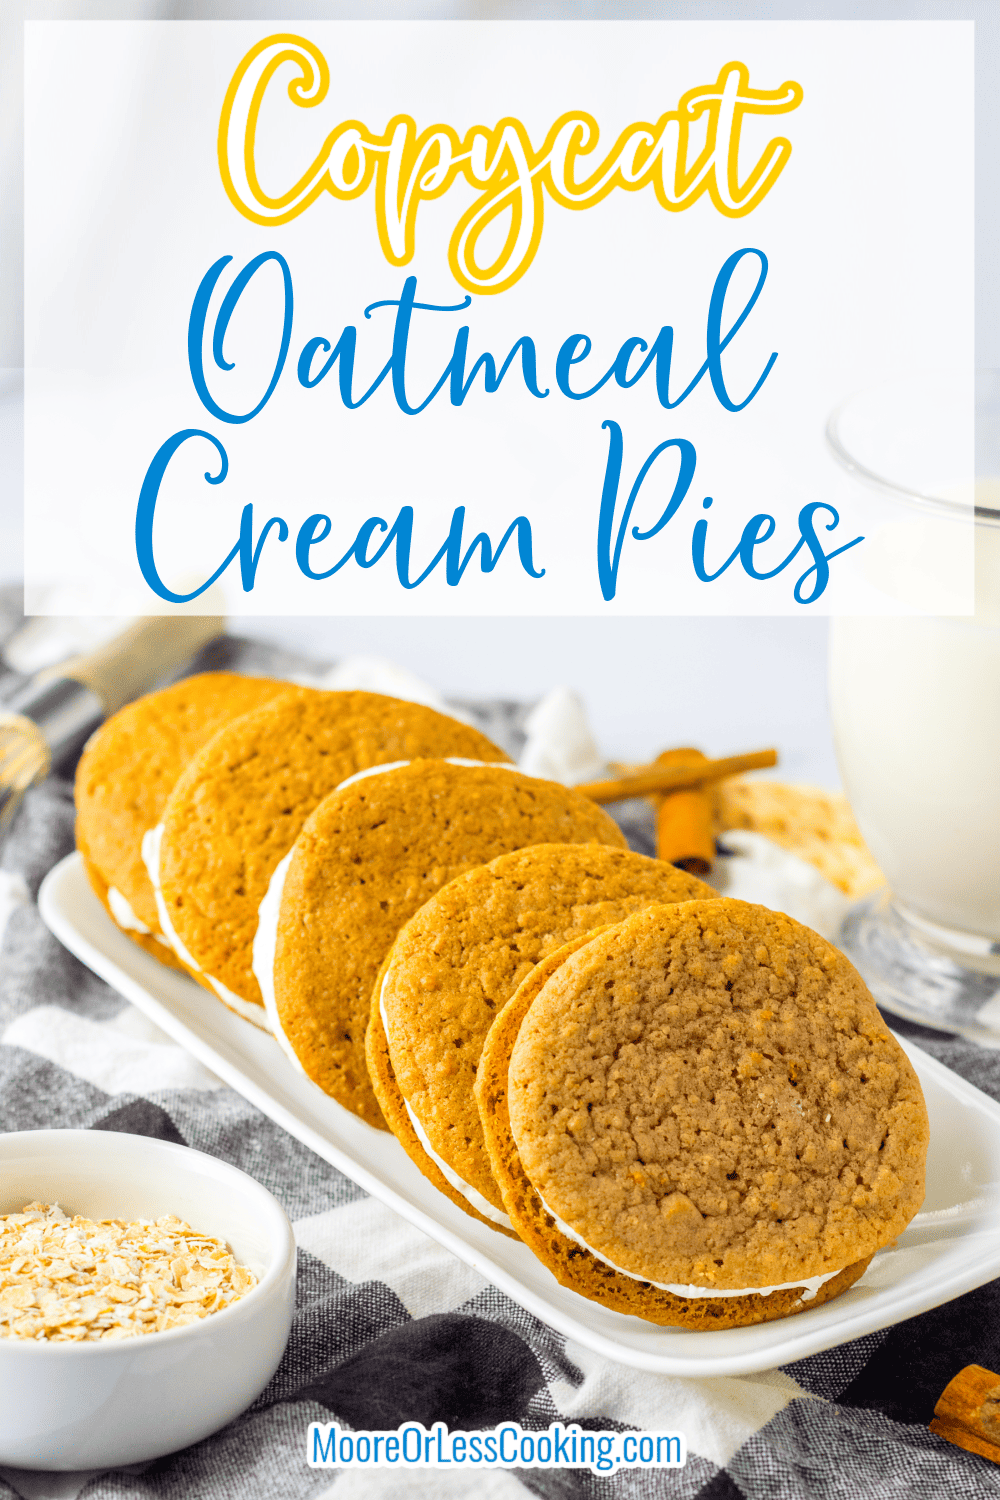 Up-level a batch of homemade oatmeal cookies by sandwiching a sweet and fluffy filling between two cookies to create the best copycat version of a retro favorite - Oatmeal Cream Pies! via @Mooreorlesscook